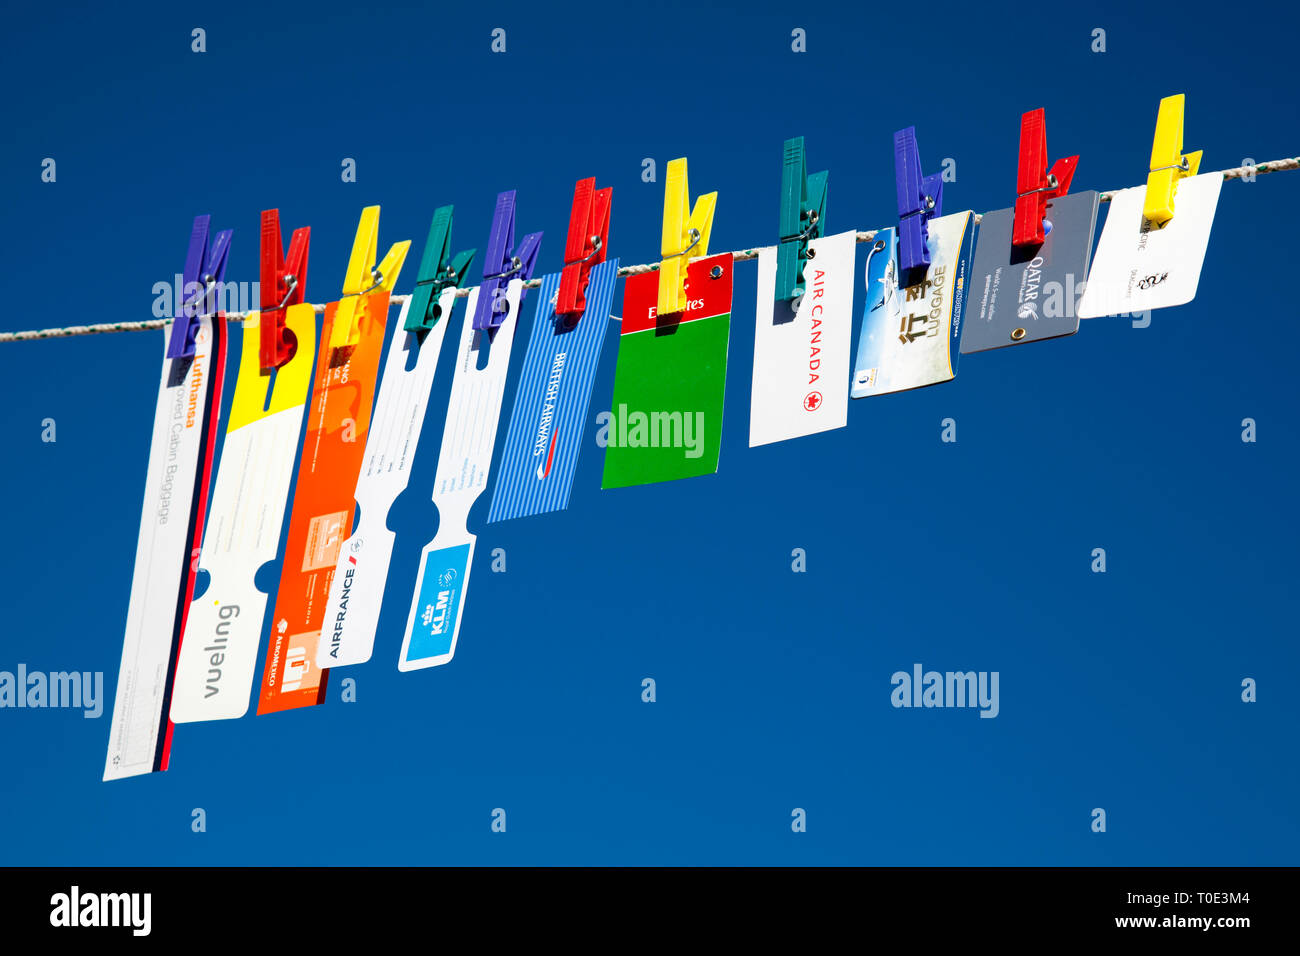 Hand luggage tags of different airlines hanging from a clothespin over a blue sky Stock Photo